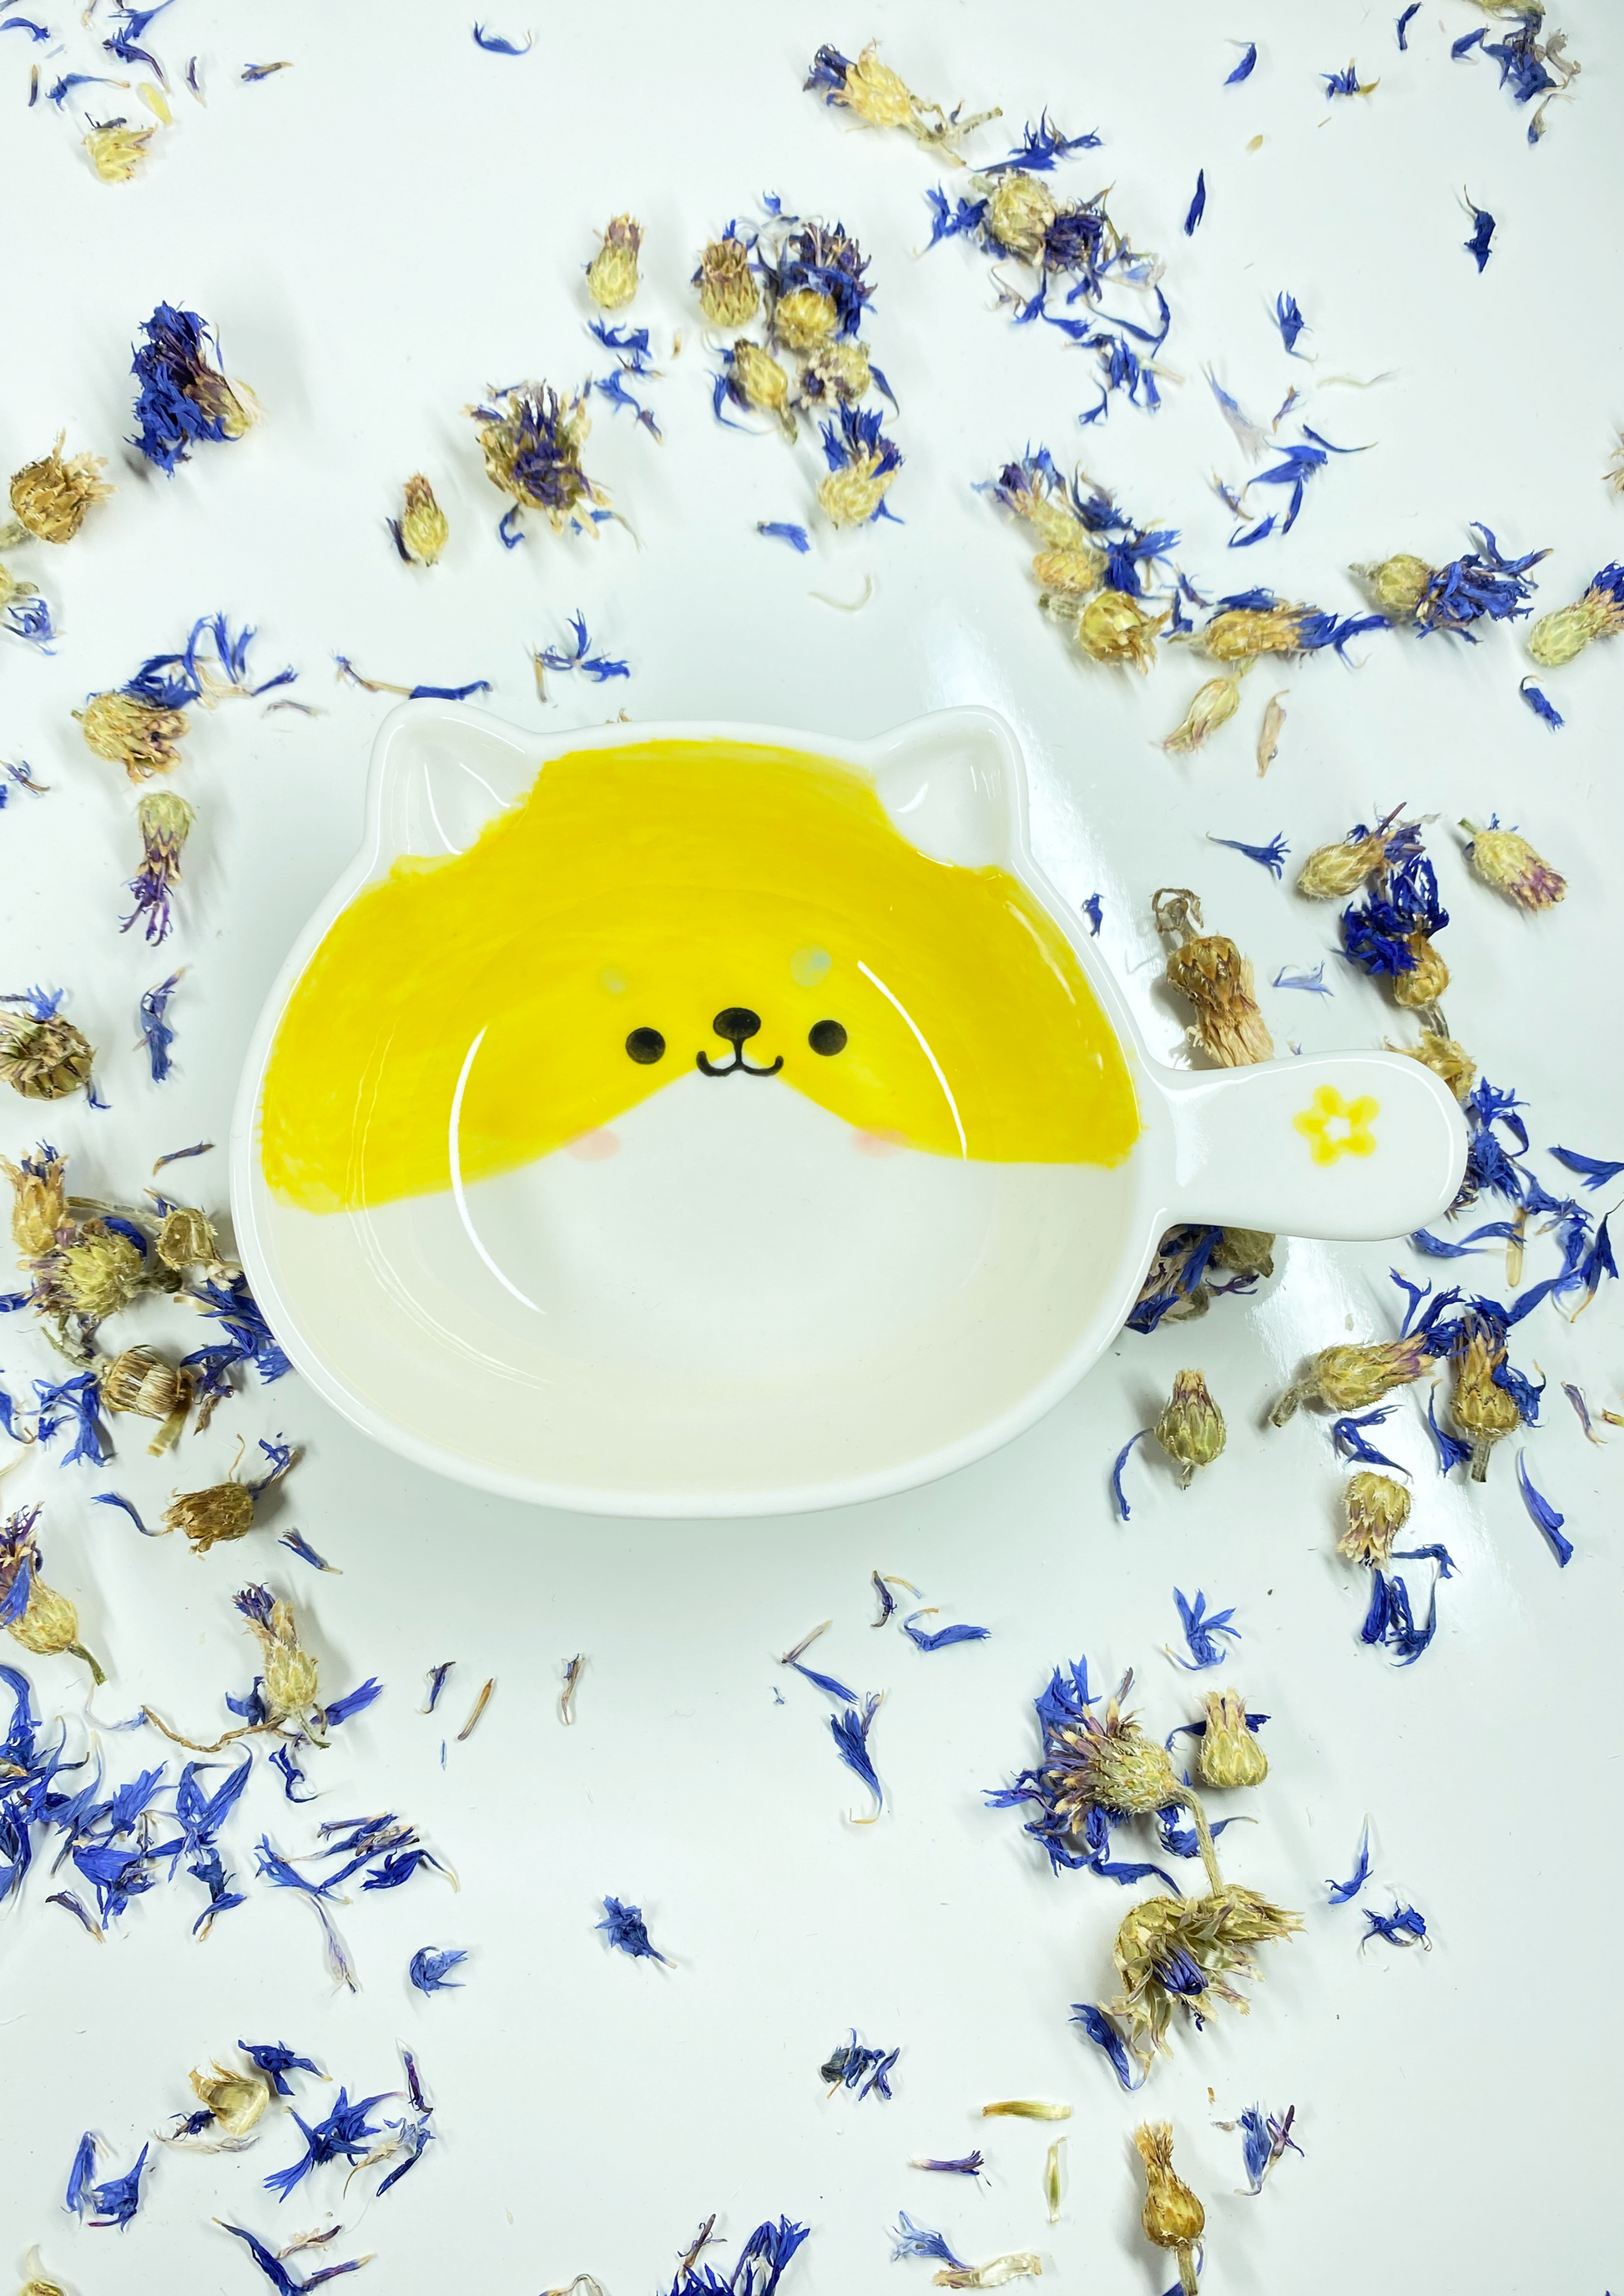 Shop our Animal-Shaped Bowls for the perfect small pet feeding solution! Ideal for guinea pigs, hamsters, and other small animals, these cute, durable bowls are non-tip and easy to clean. Upgrade your pet's mealtime with our fun, functional feeders moony paw